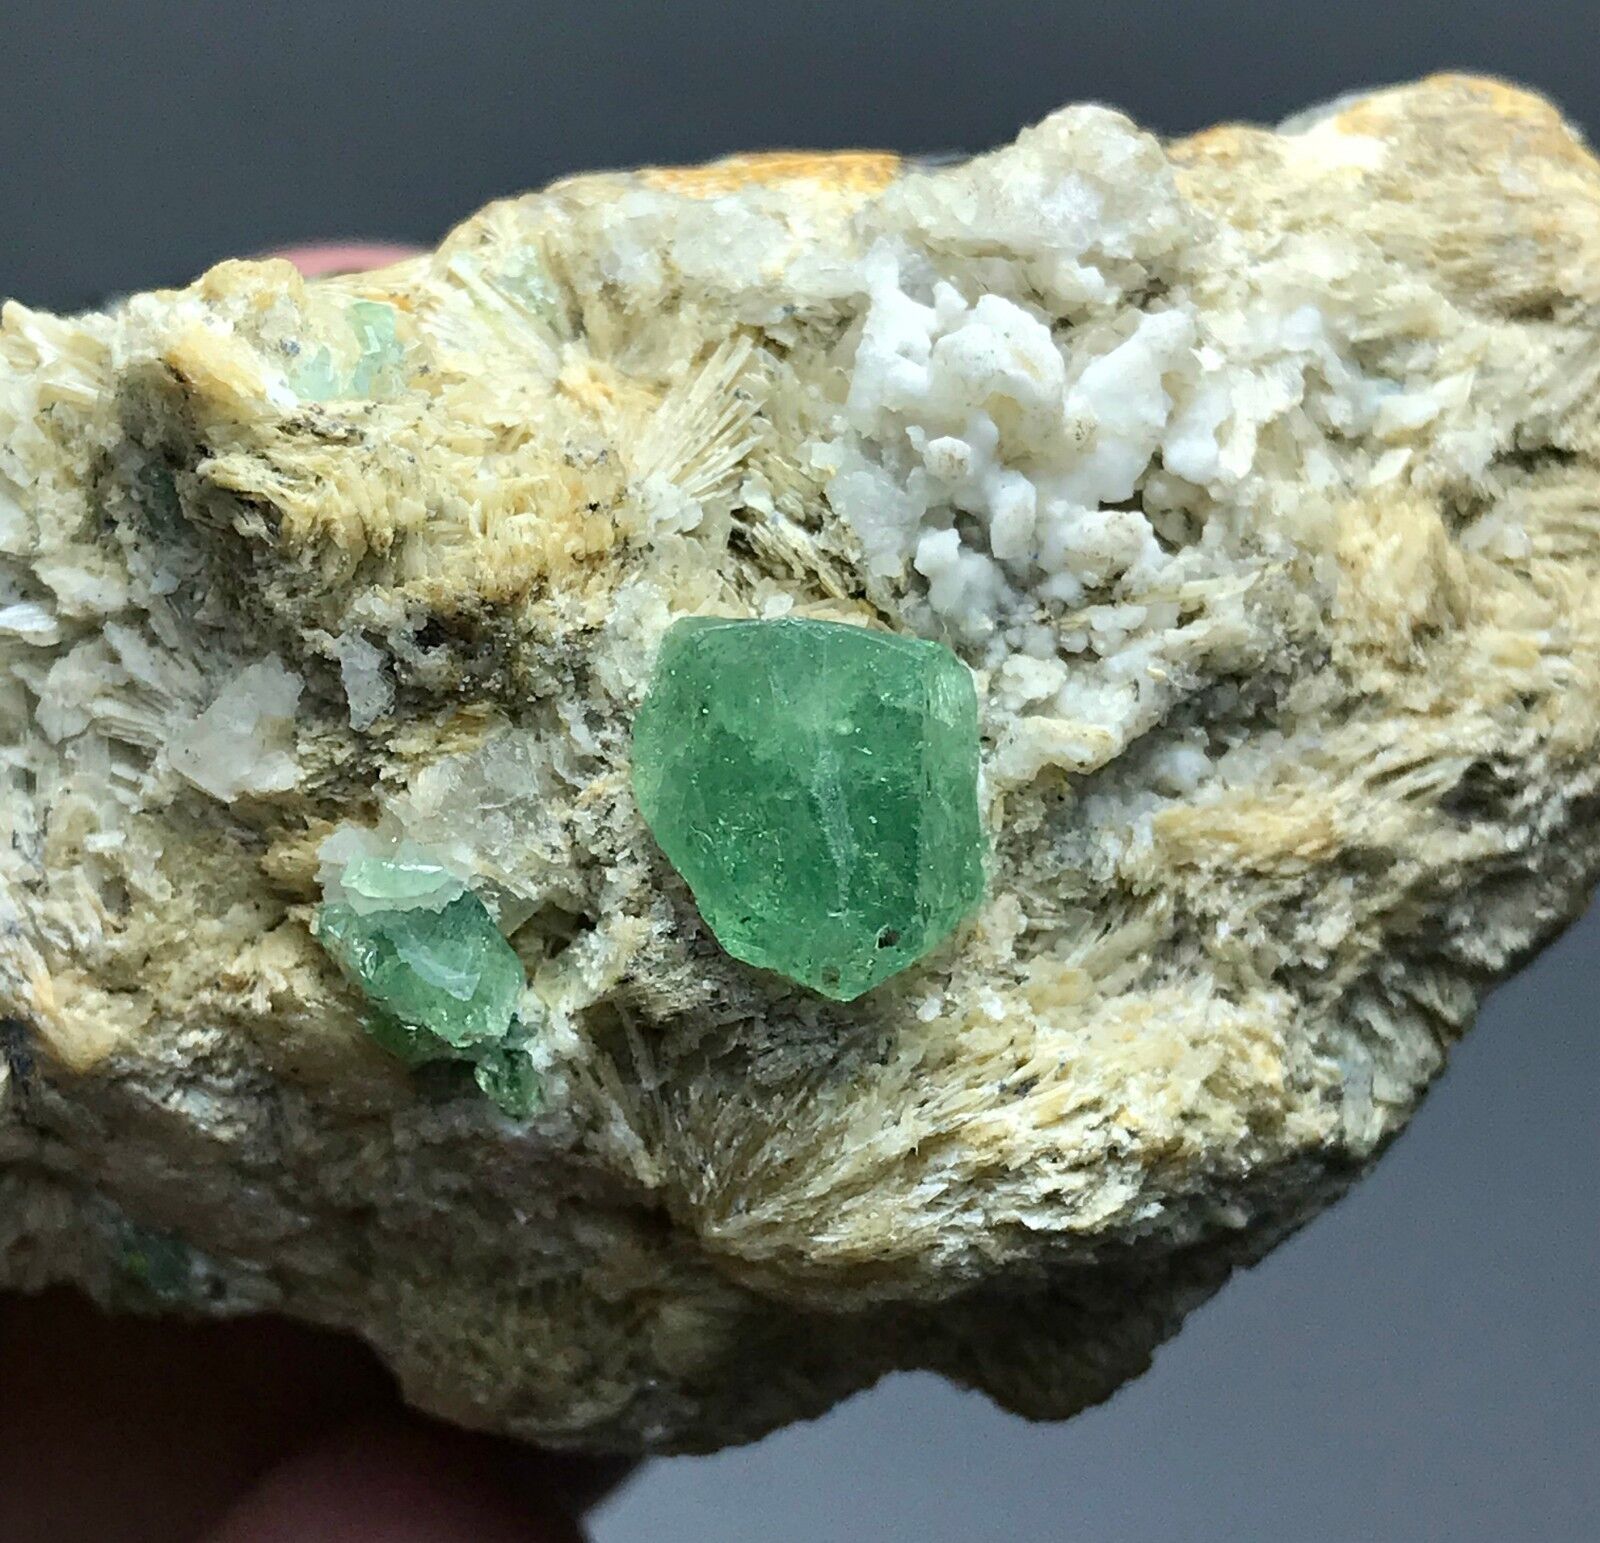 460 CT well terminated Green Garnet crystal on Matrix from Khost Afghanistan